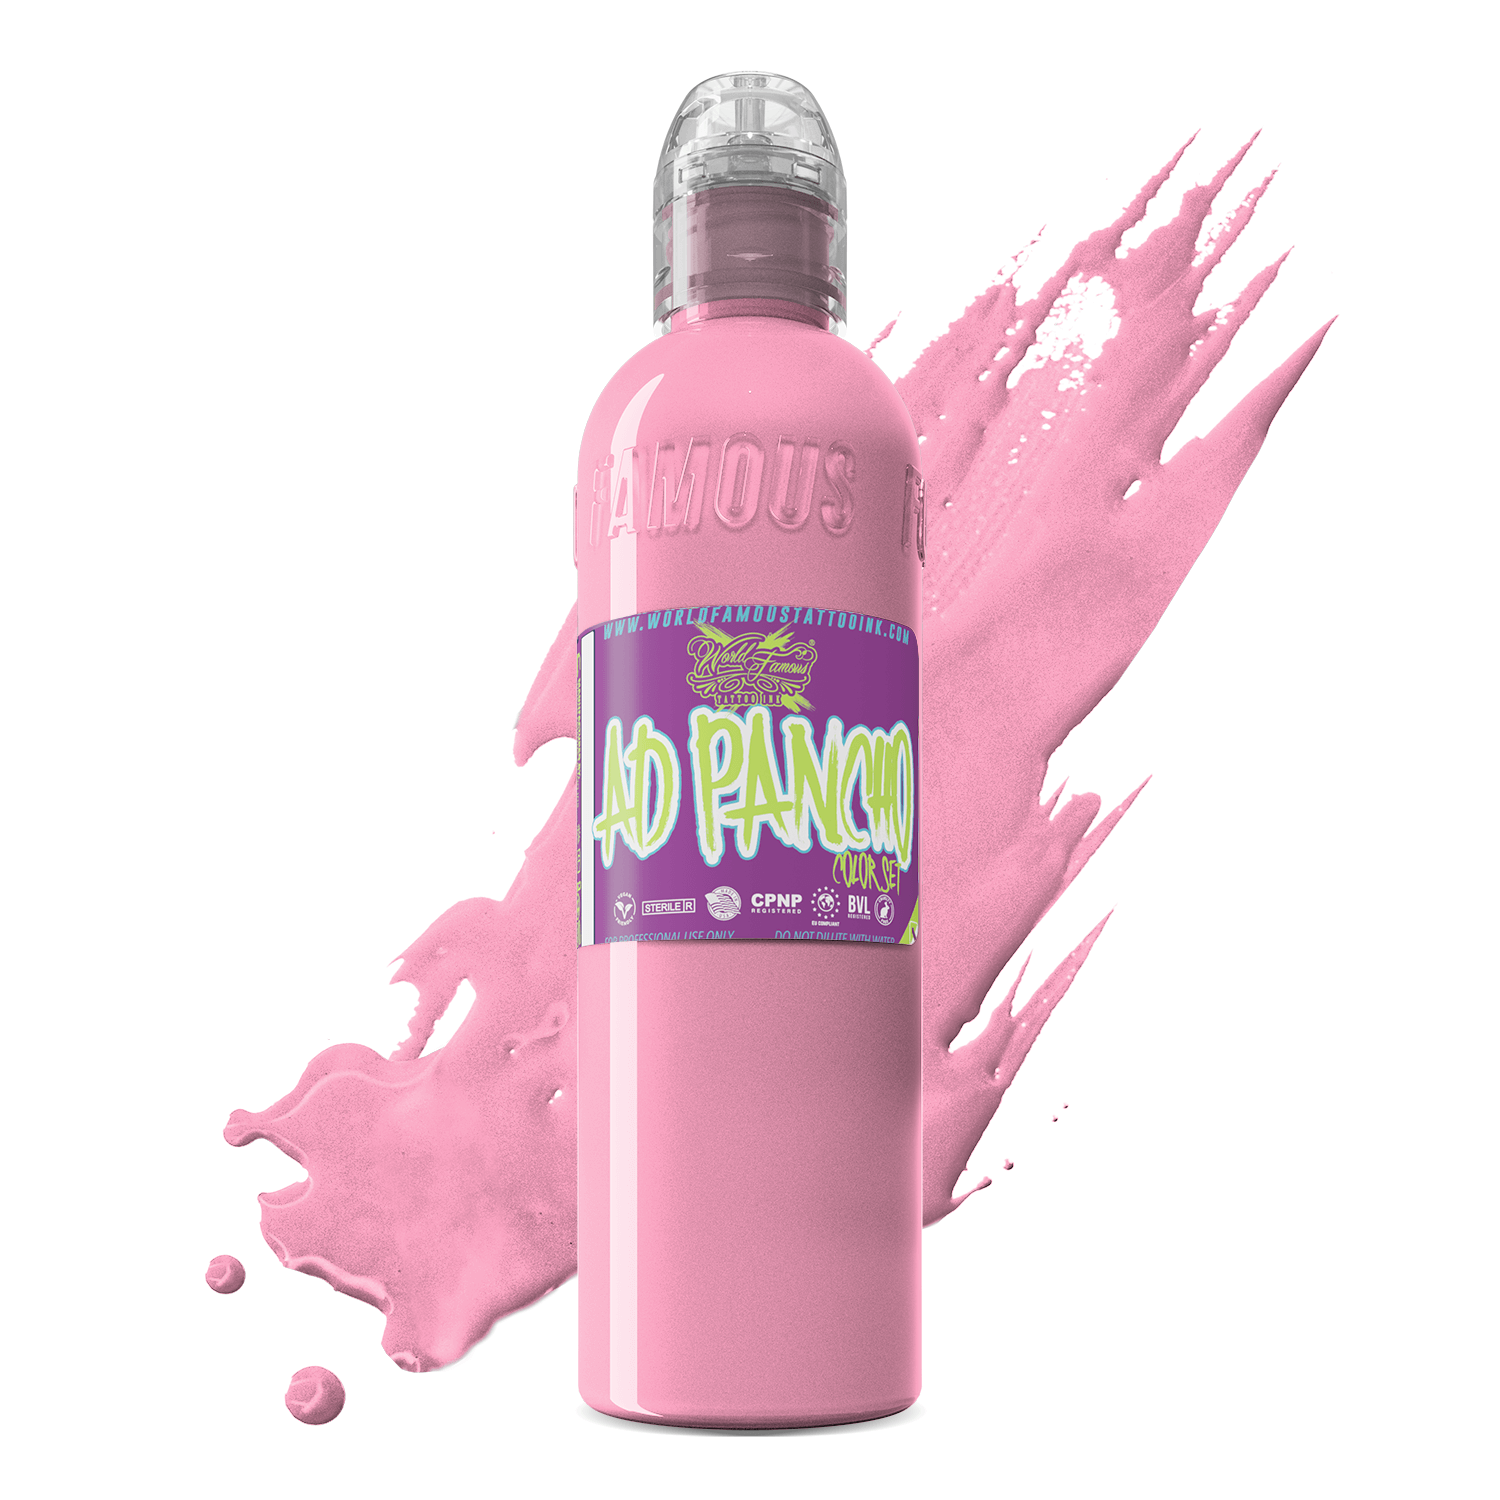 A.D. Pancho Proteam Color - Light Pink | World Famous Tattoo Ink